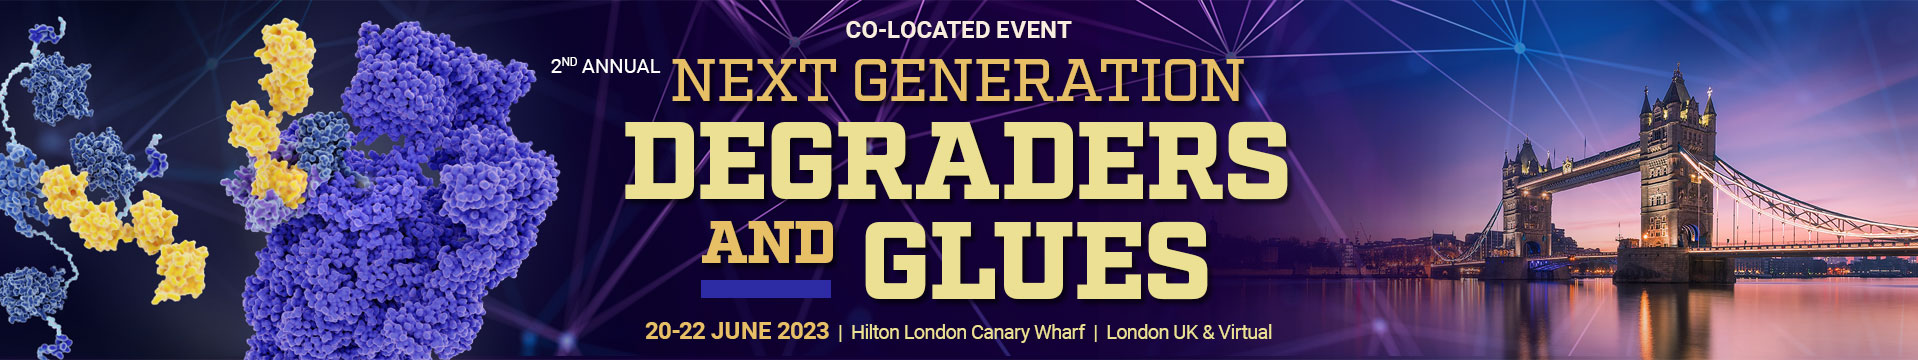 Co-Located Event: Next Generation Degraders and Glues